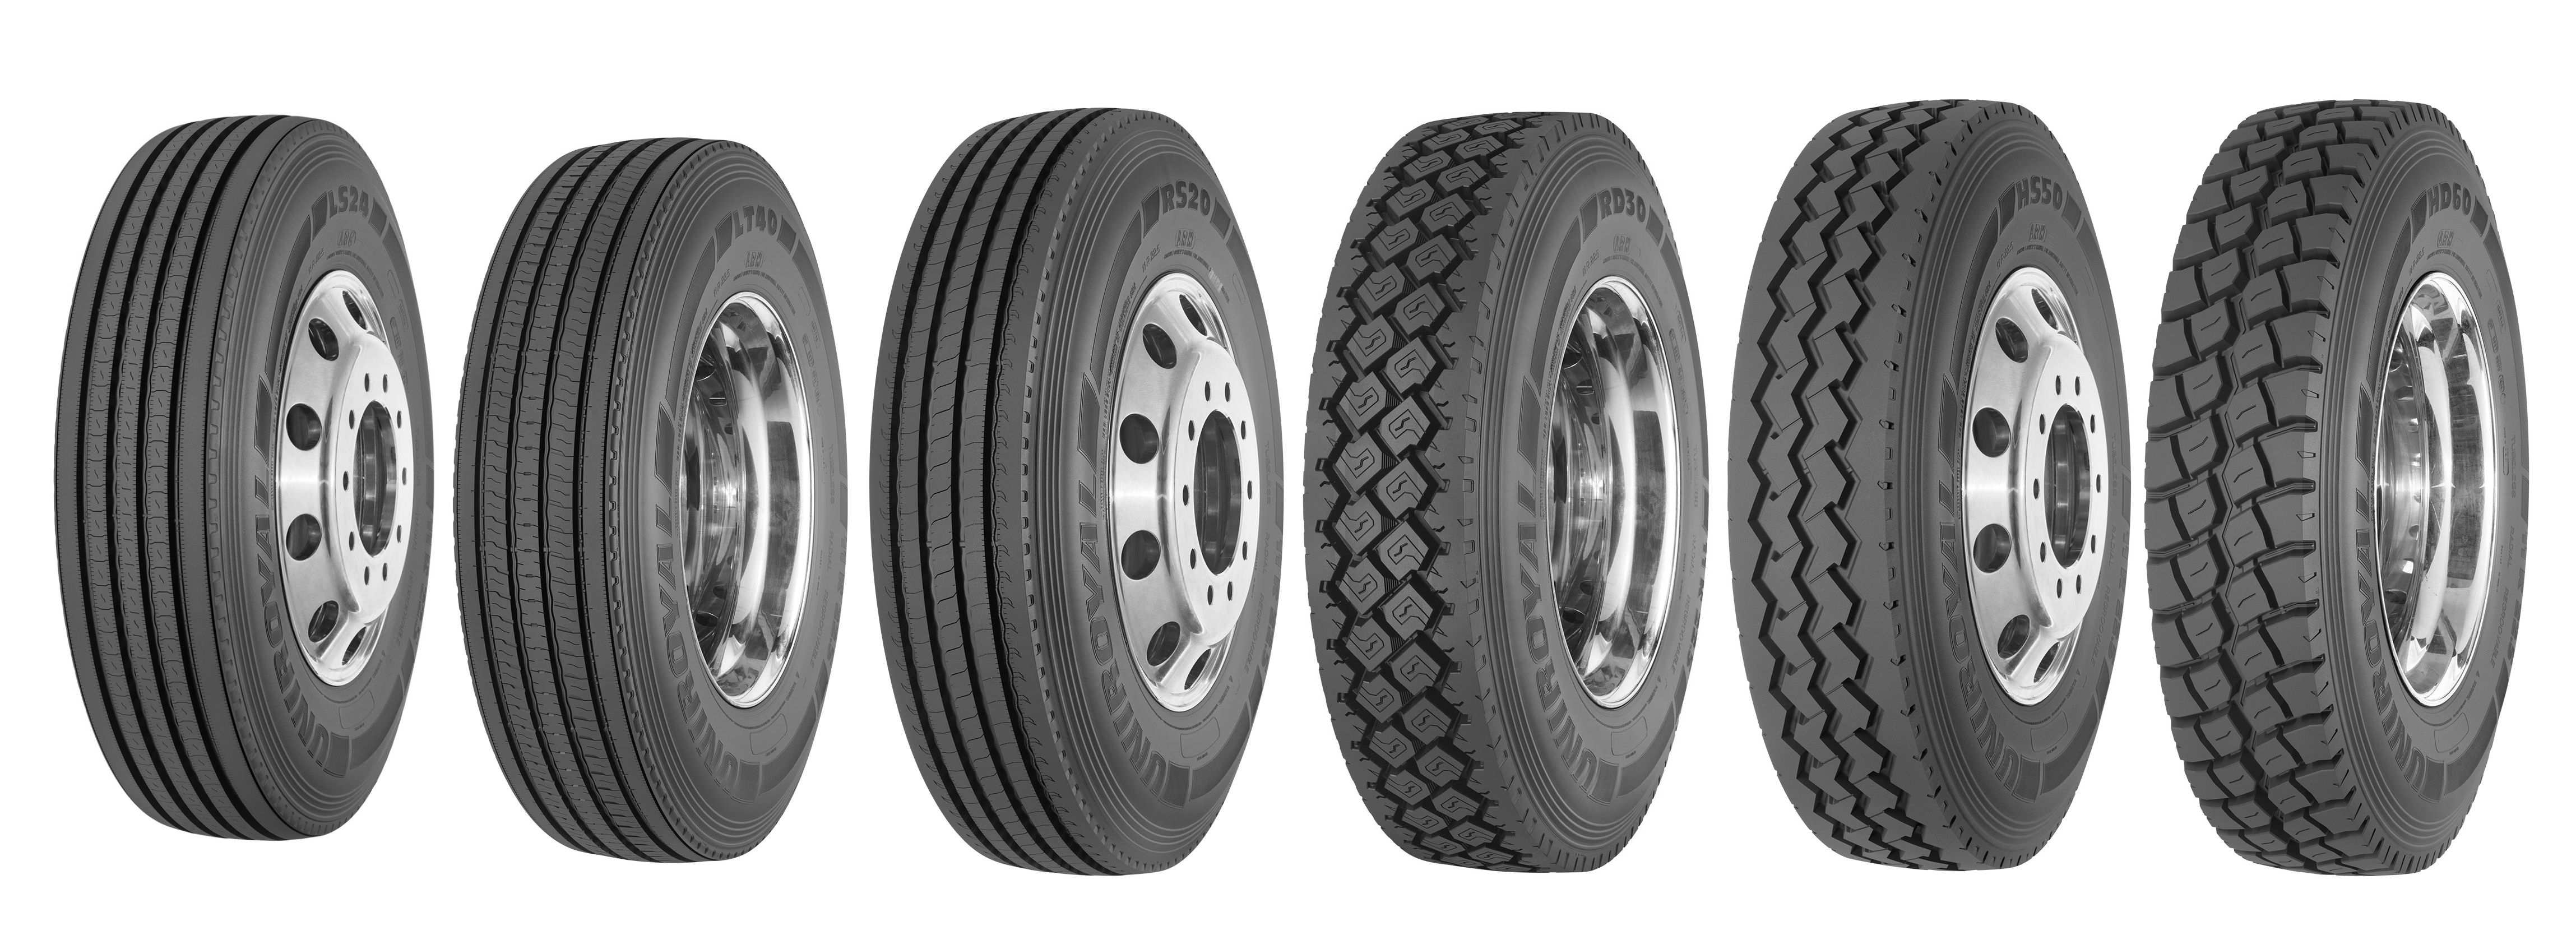 Uniroyal truck tyres launch in USA